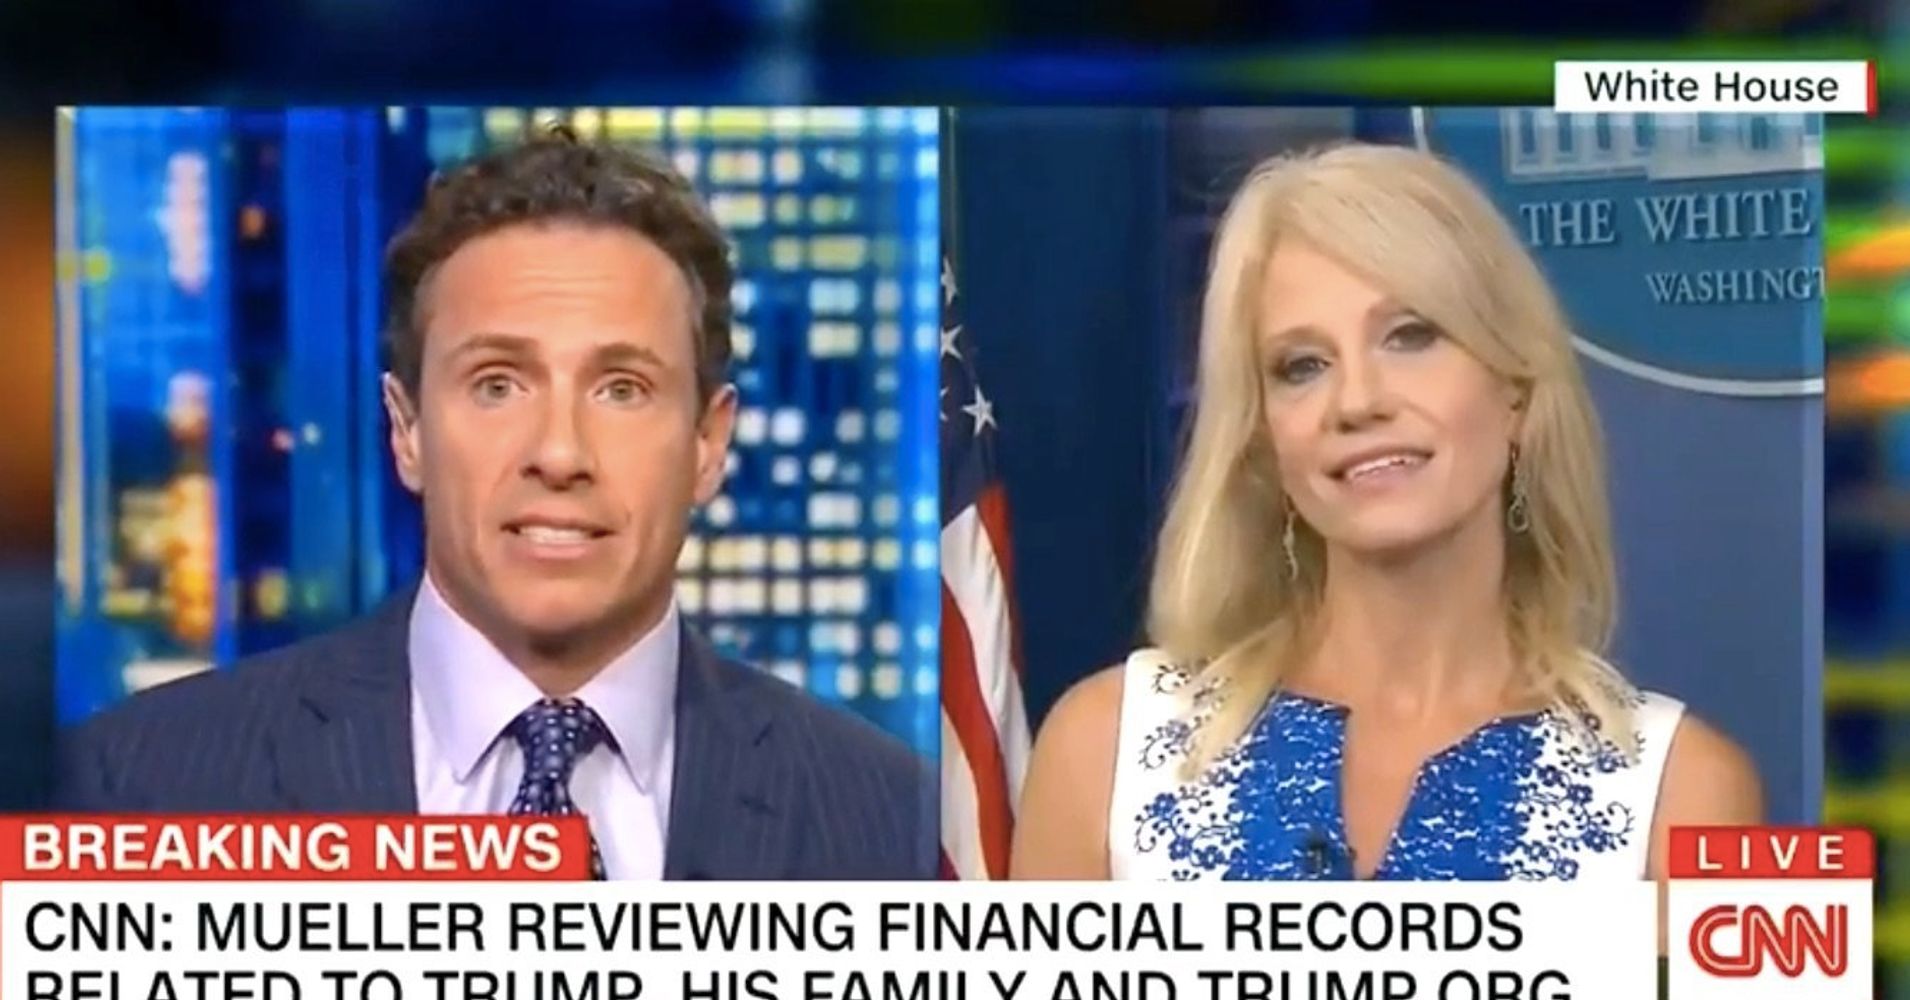 Chris Cuomo Gets Into Heated Debate With Kellyanne Conway On Live TV | HuffPost1910 x 1000